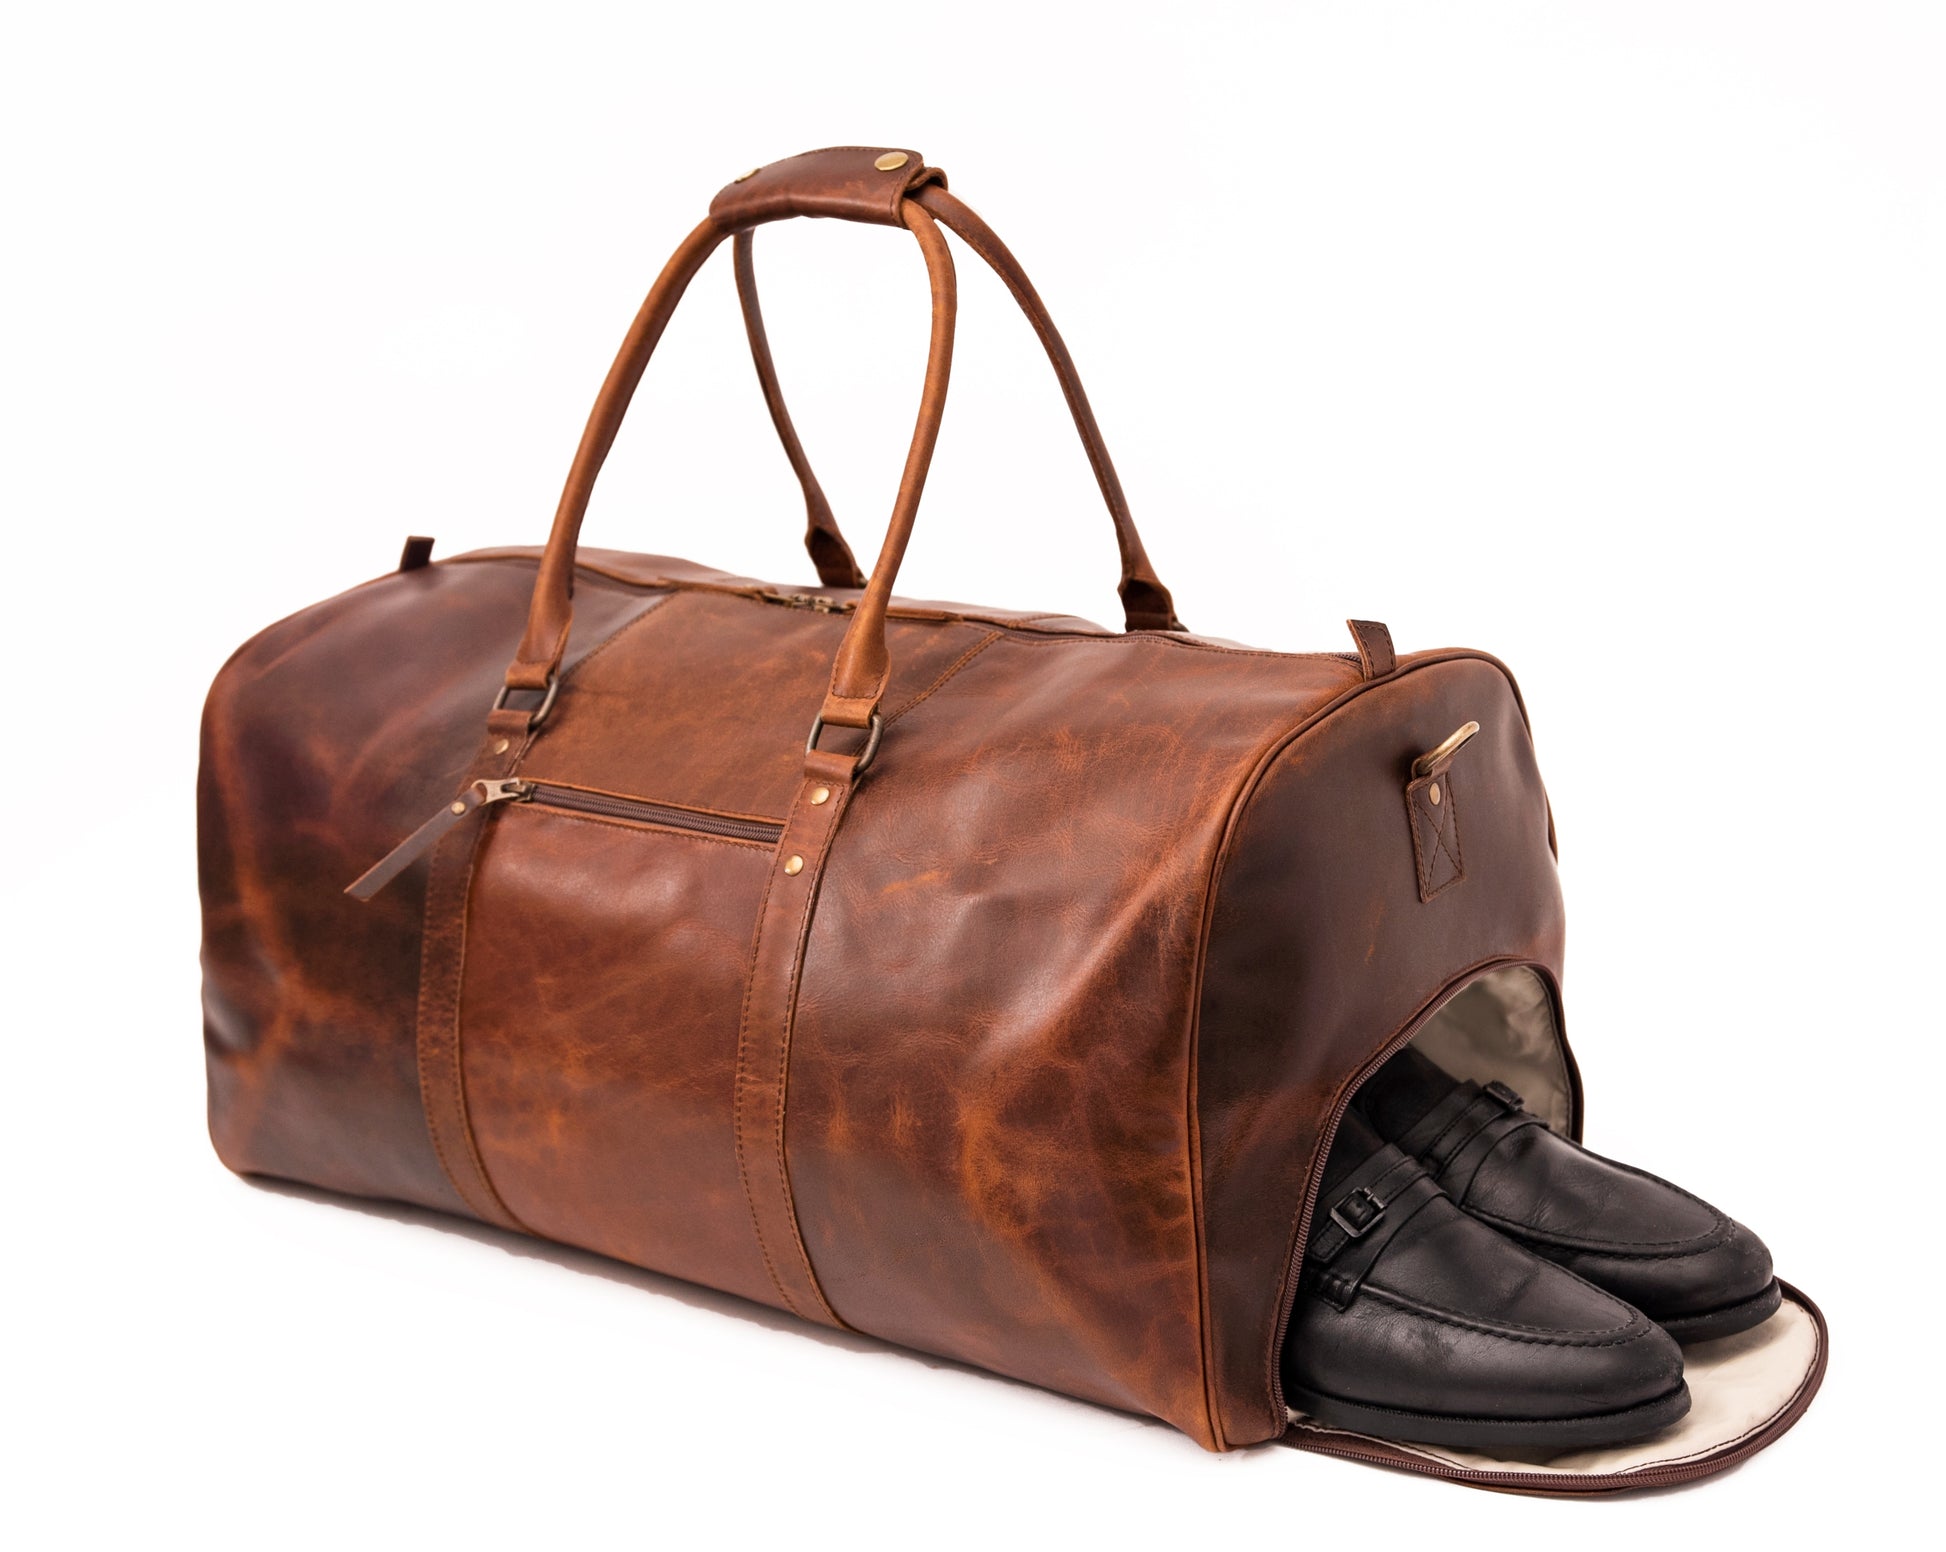 Ajax Brown Leather Duffle Bag with Shoe Compartment